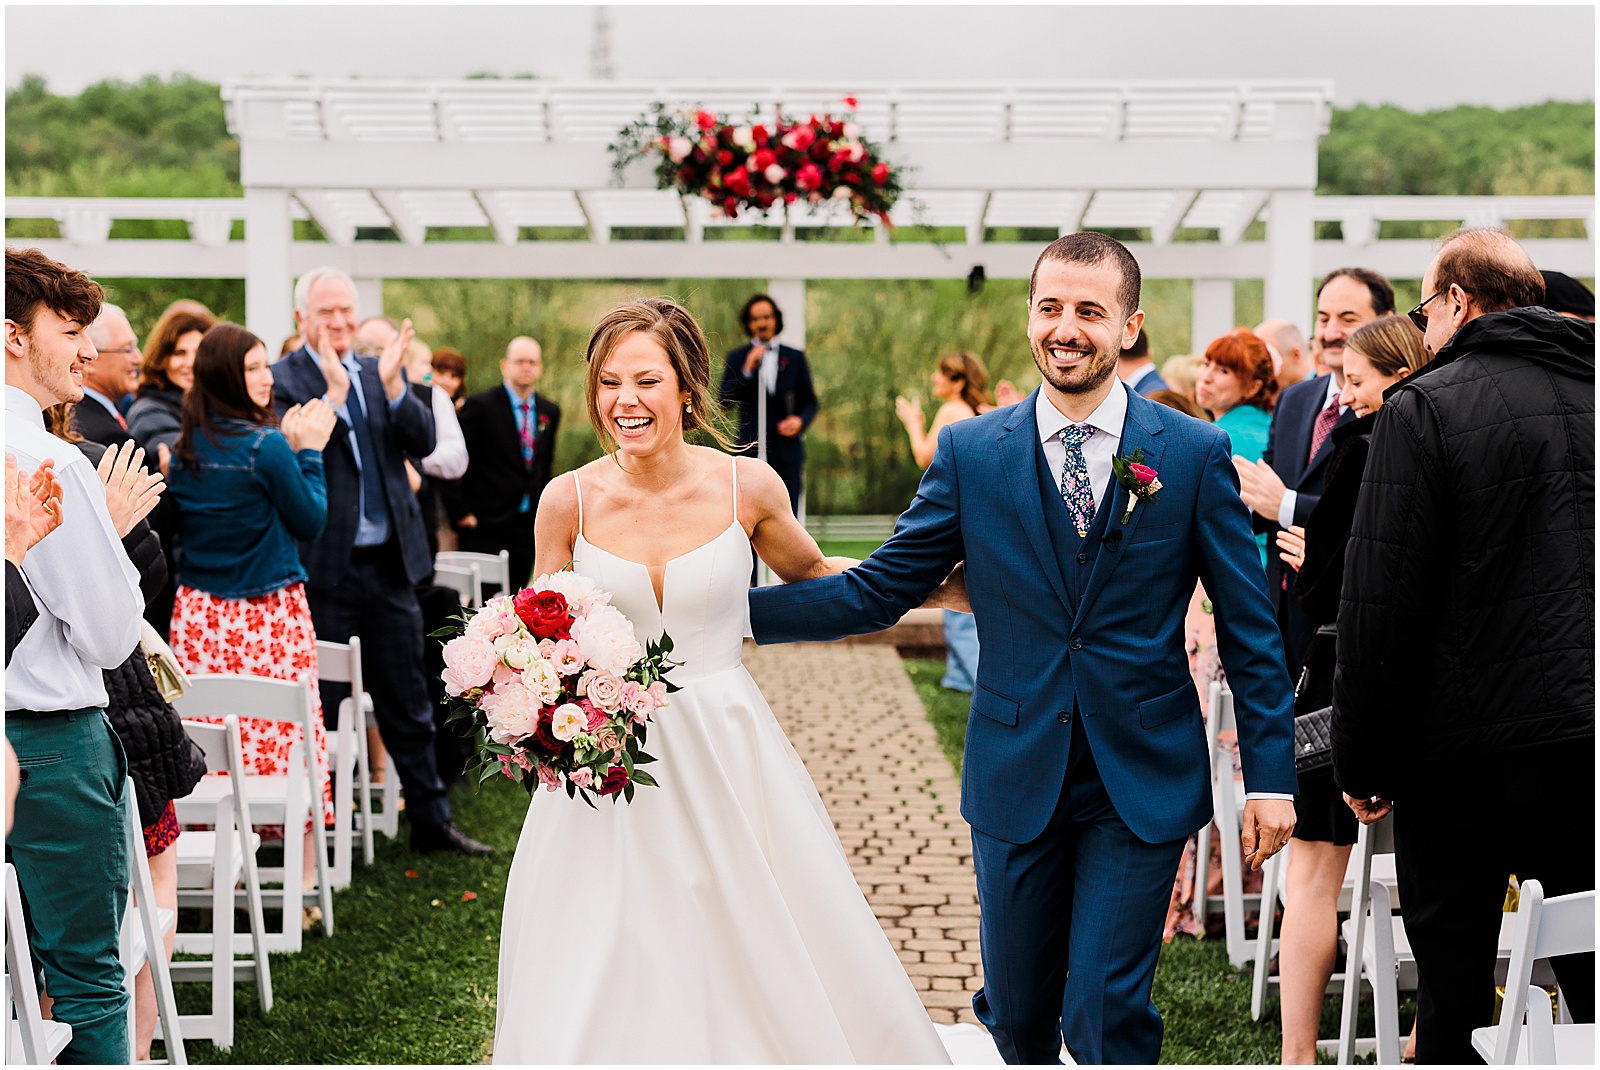 A bride and groom smile as they walk their recessional at the Barn at Stoneybrooke.